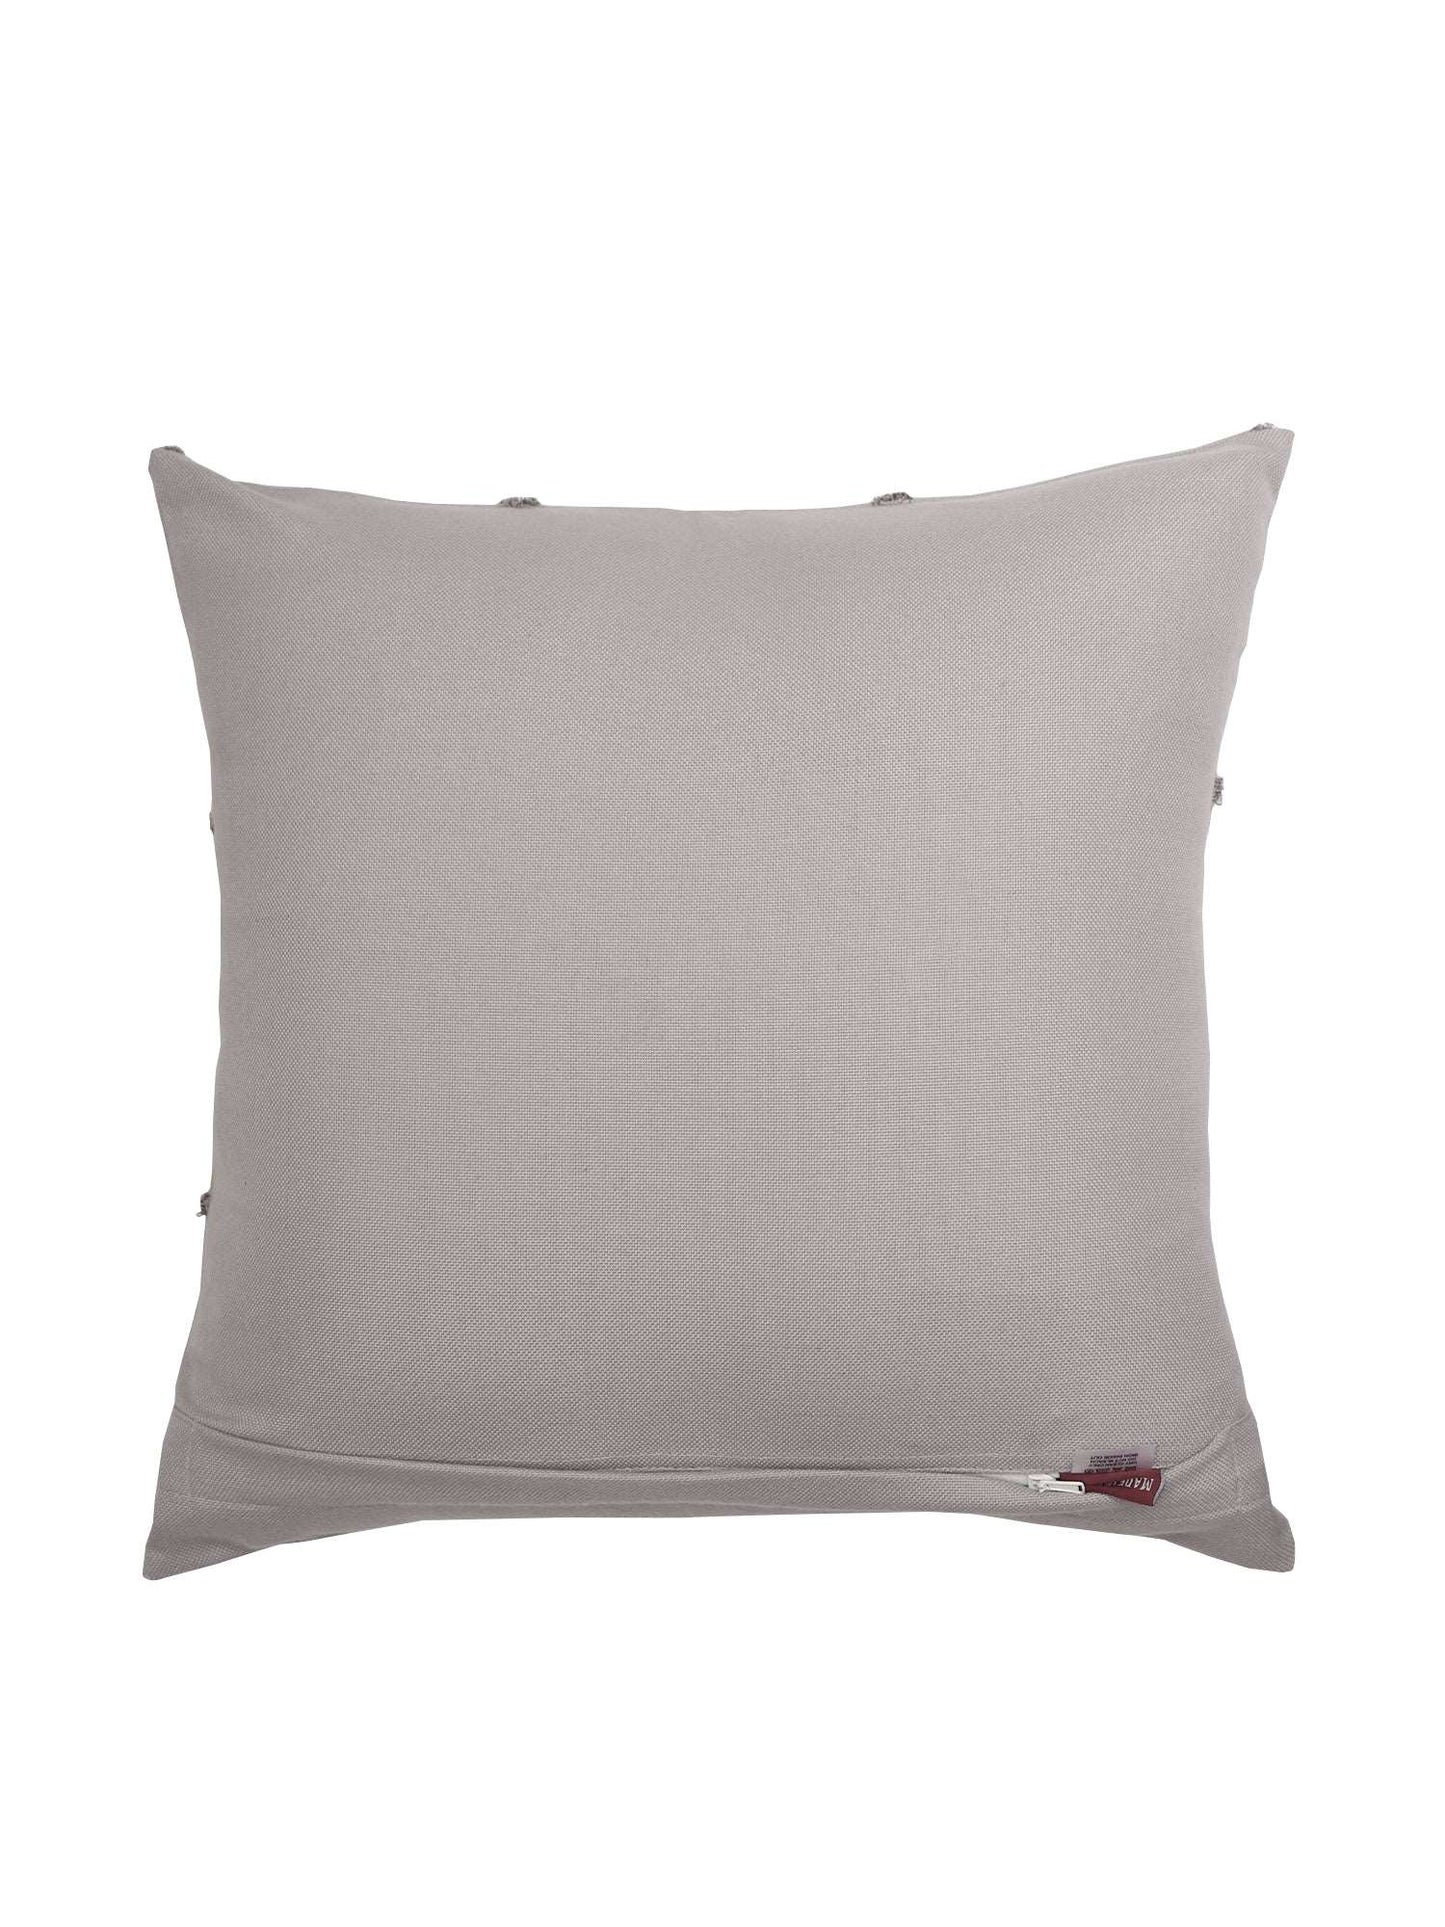 Cushion Cover Cotton Blend Floral Aari and Towel Textured Embroidery with Tassels Grey - 16inches X 16inches